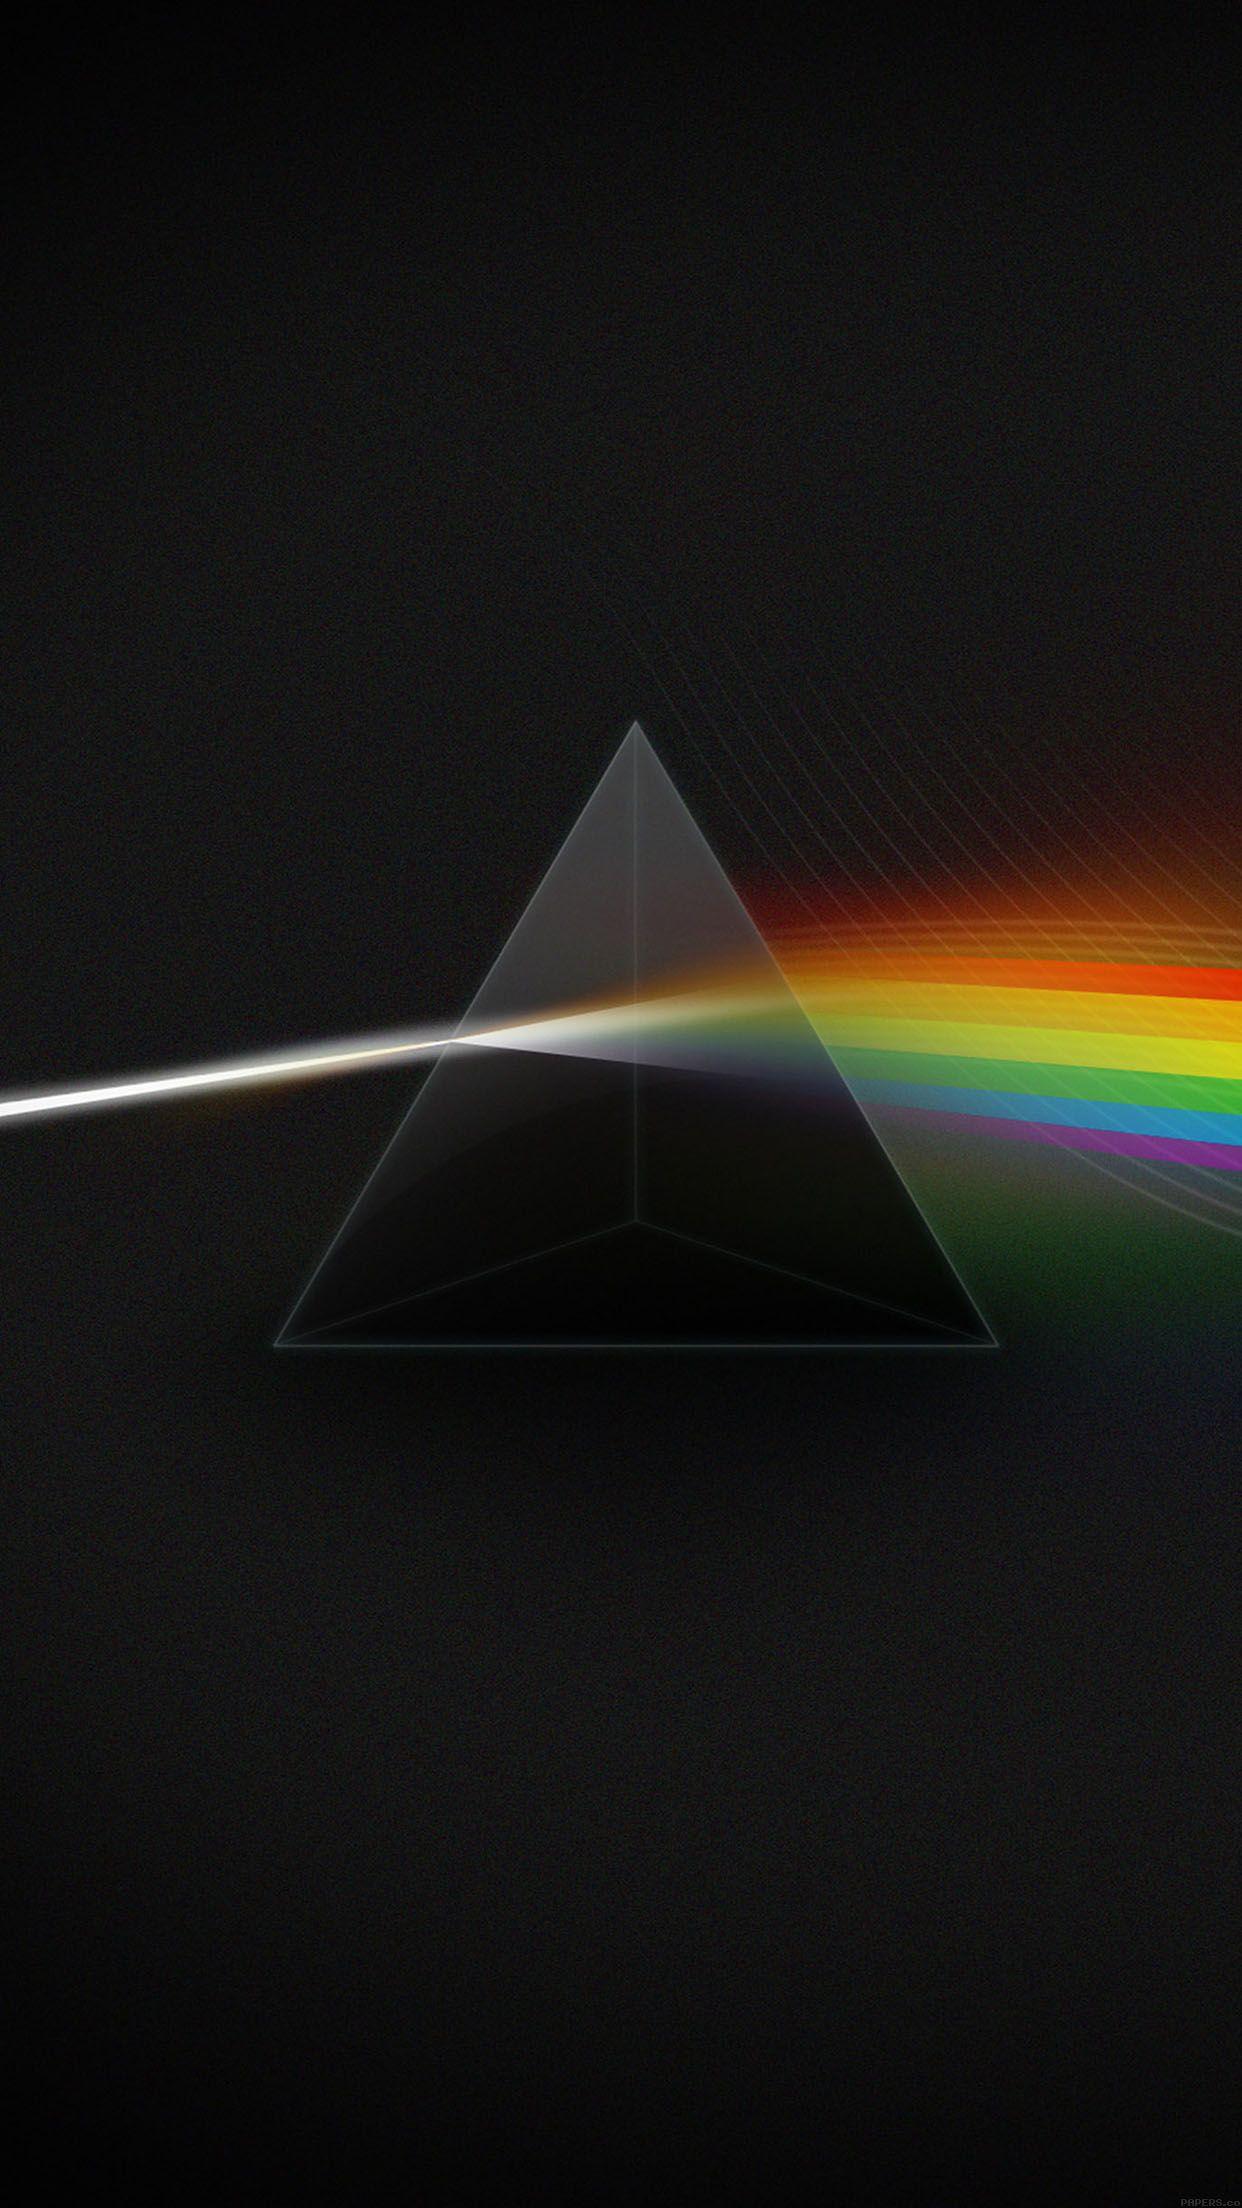 Pink Floyd Dark Side Of The Moon Music Art Android wallpapers.